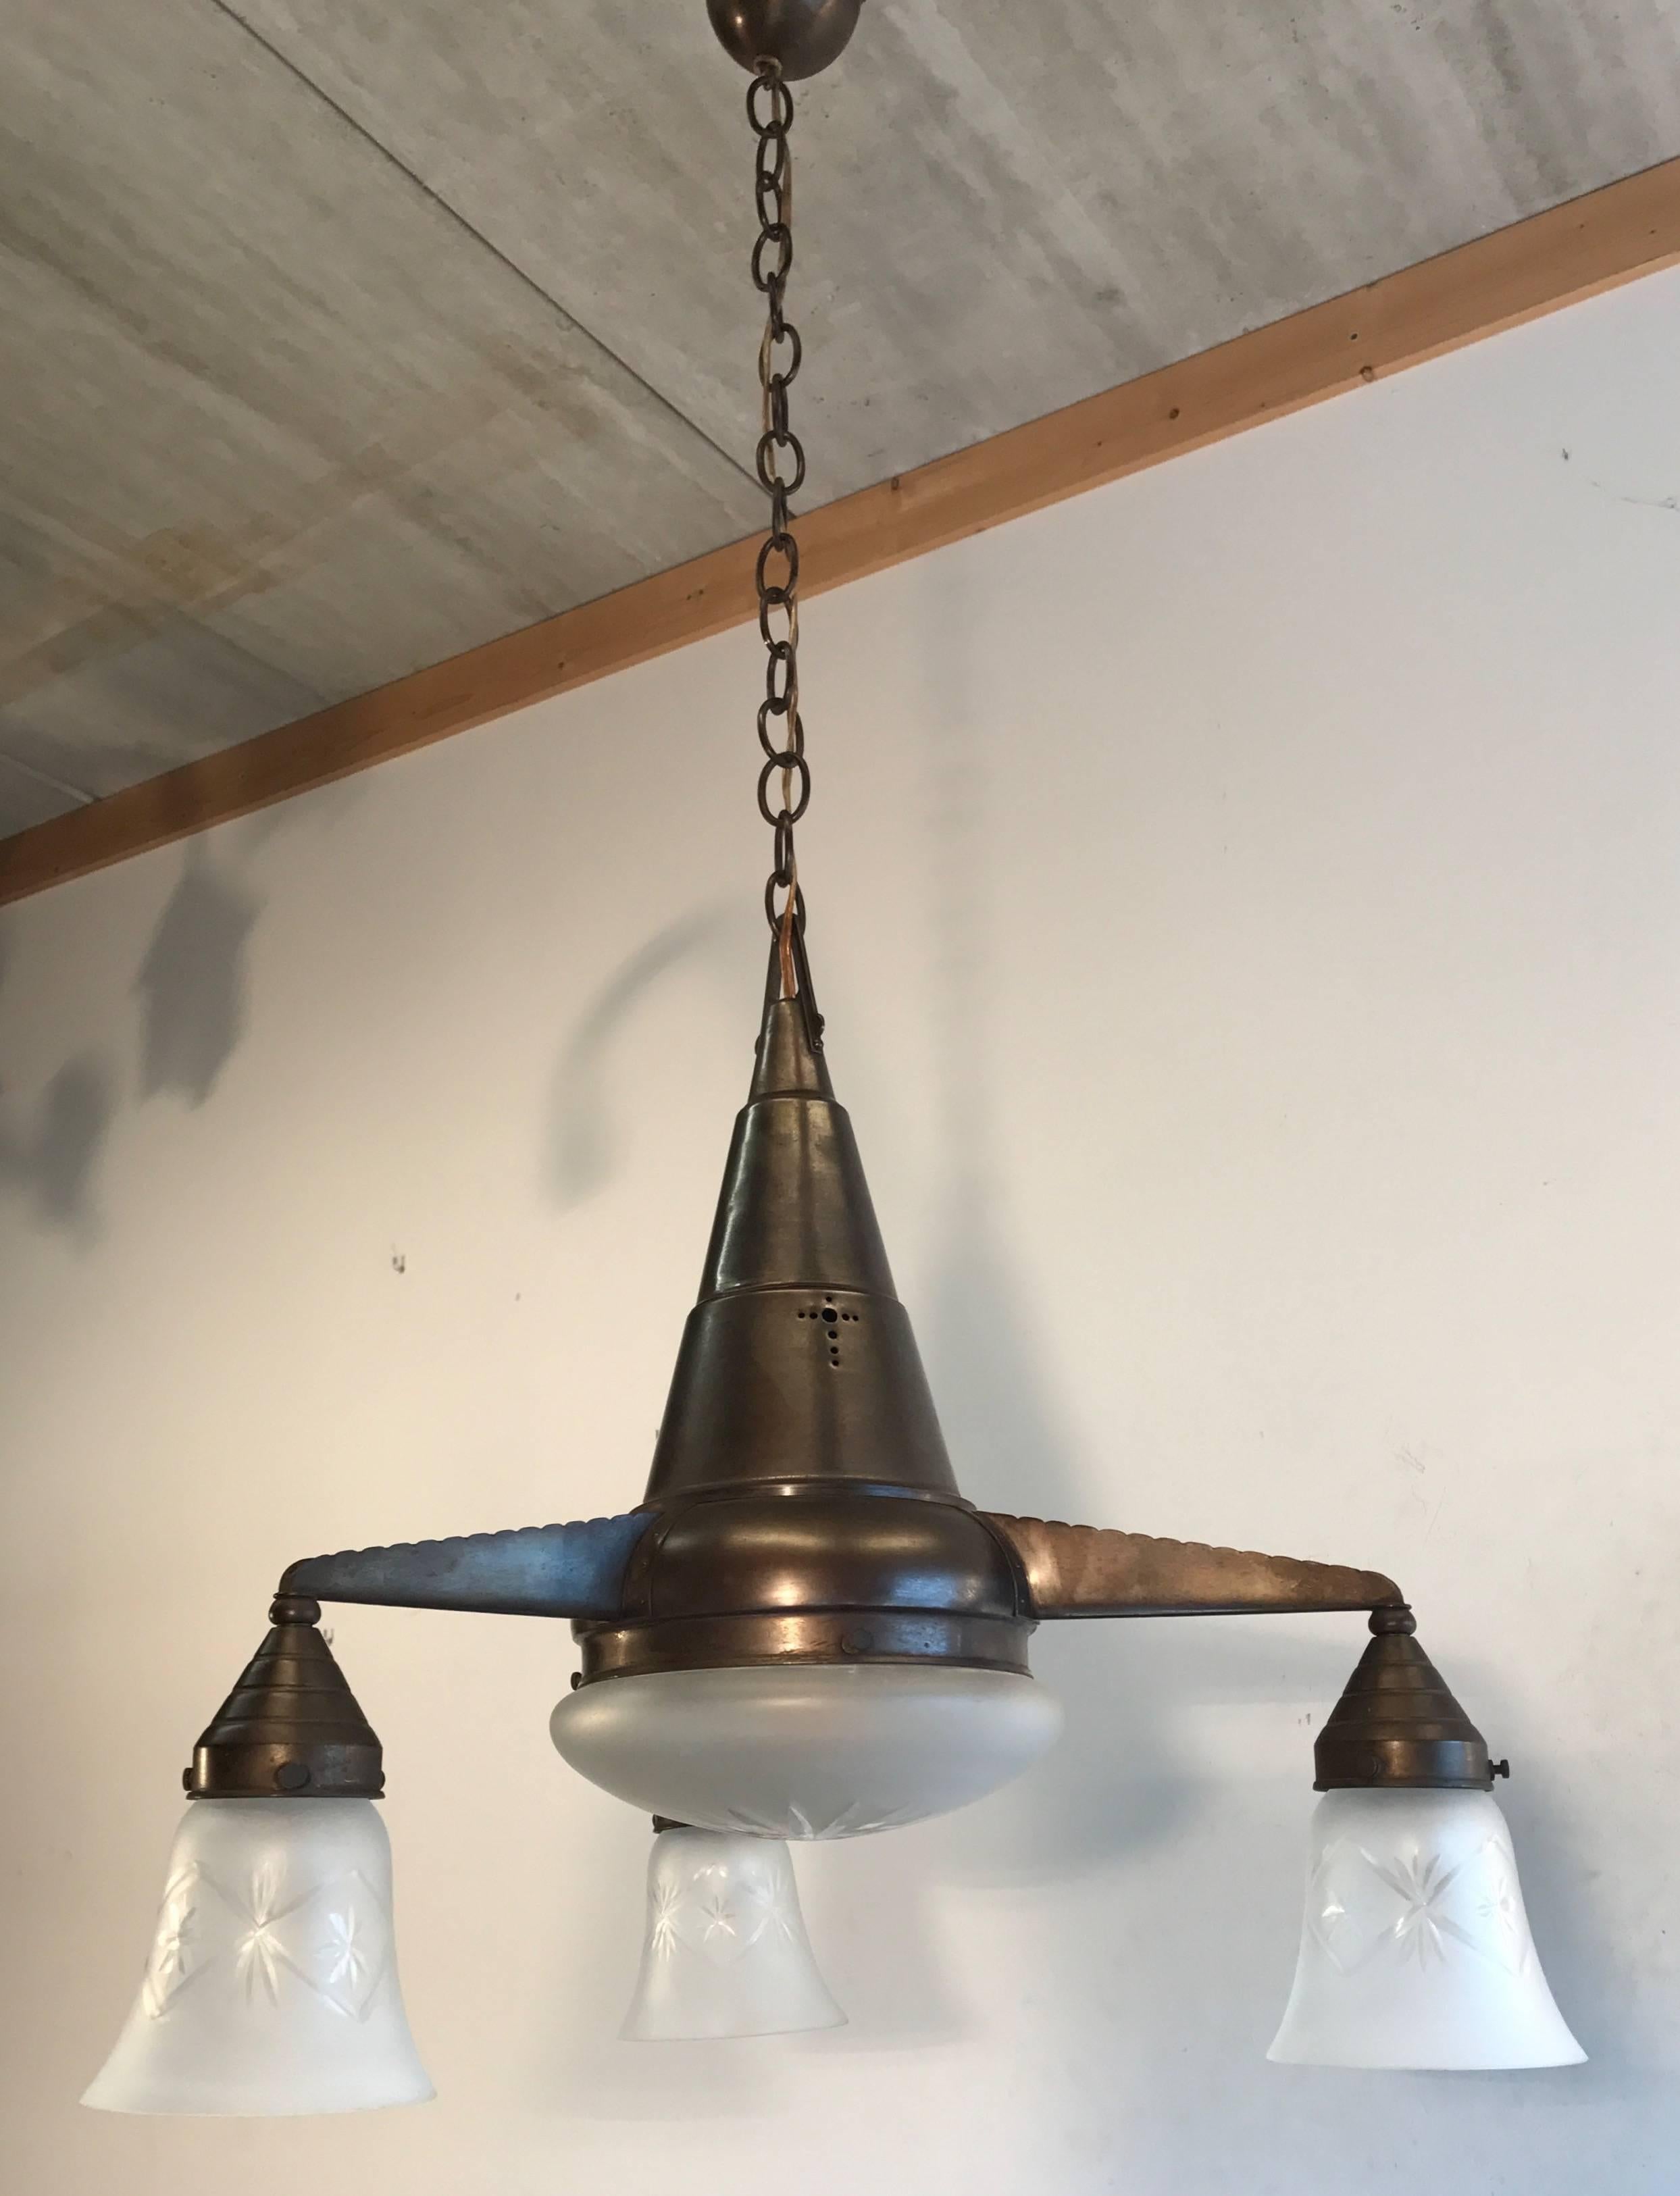 Beautiful shape, early 1900s pendant ceiling lamp.

If you have a home or an office that dates from the early 1900s or if you are a collector of stylish, Arts & Crafts home accessories than you will love the look and feel of this handcrafted, brass